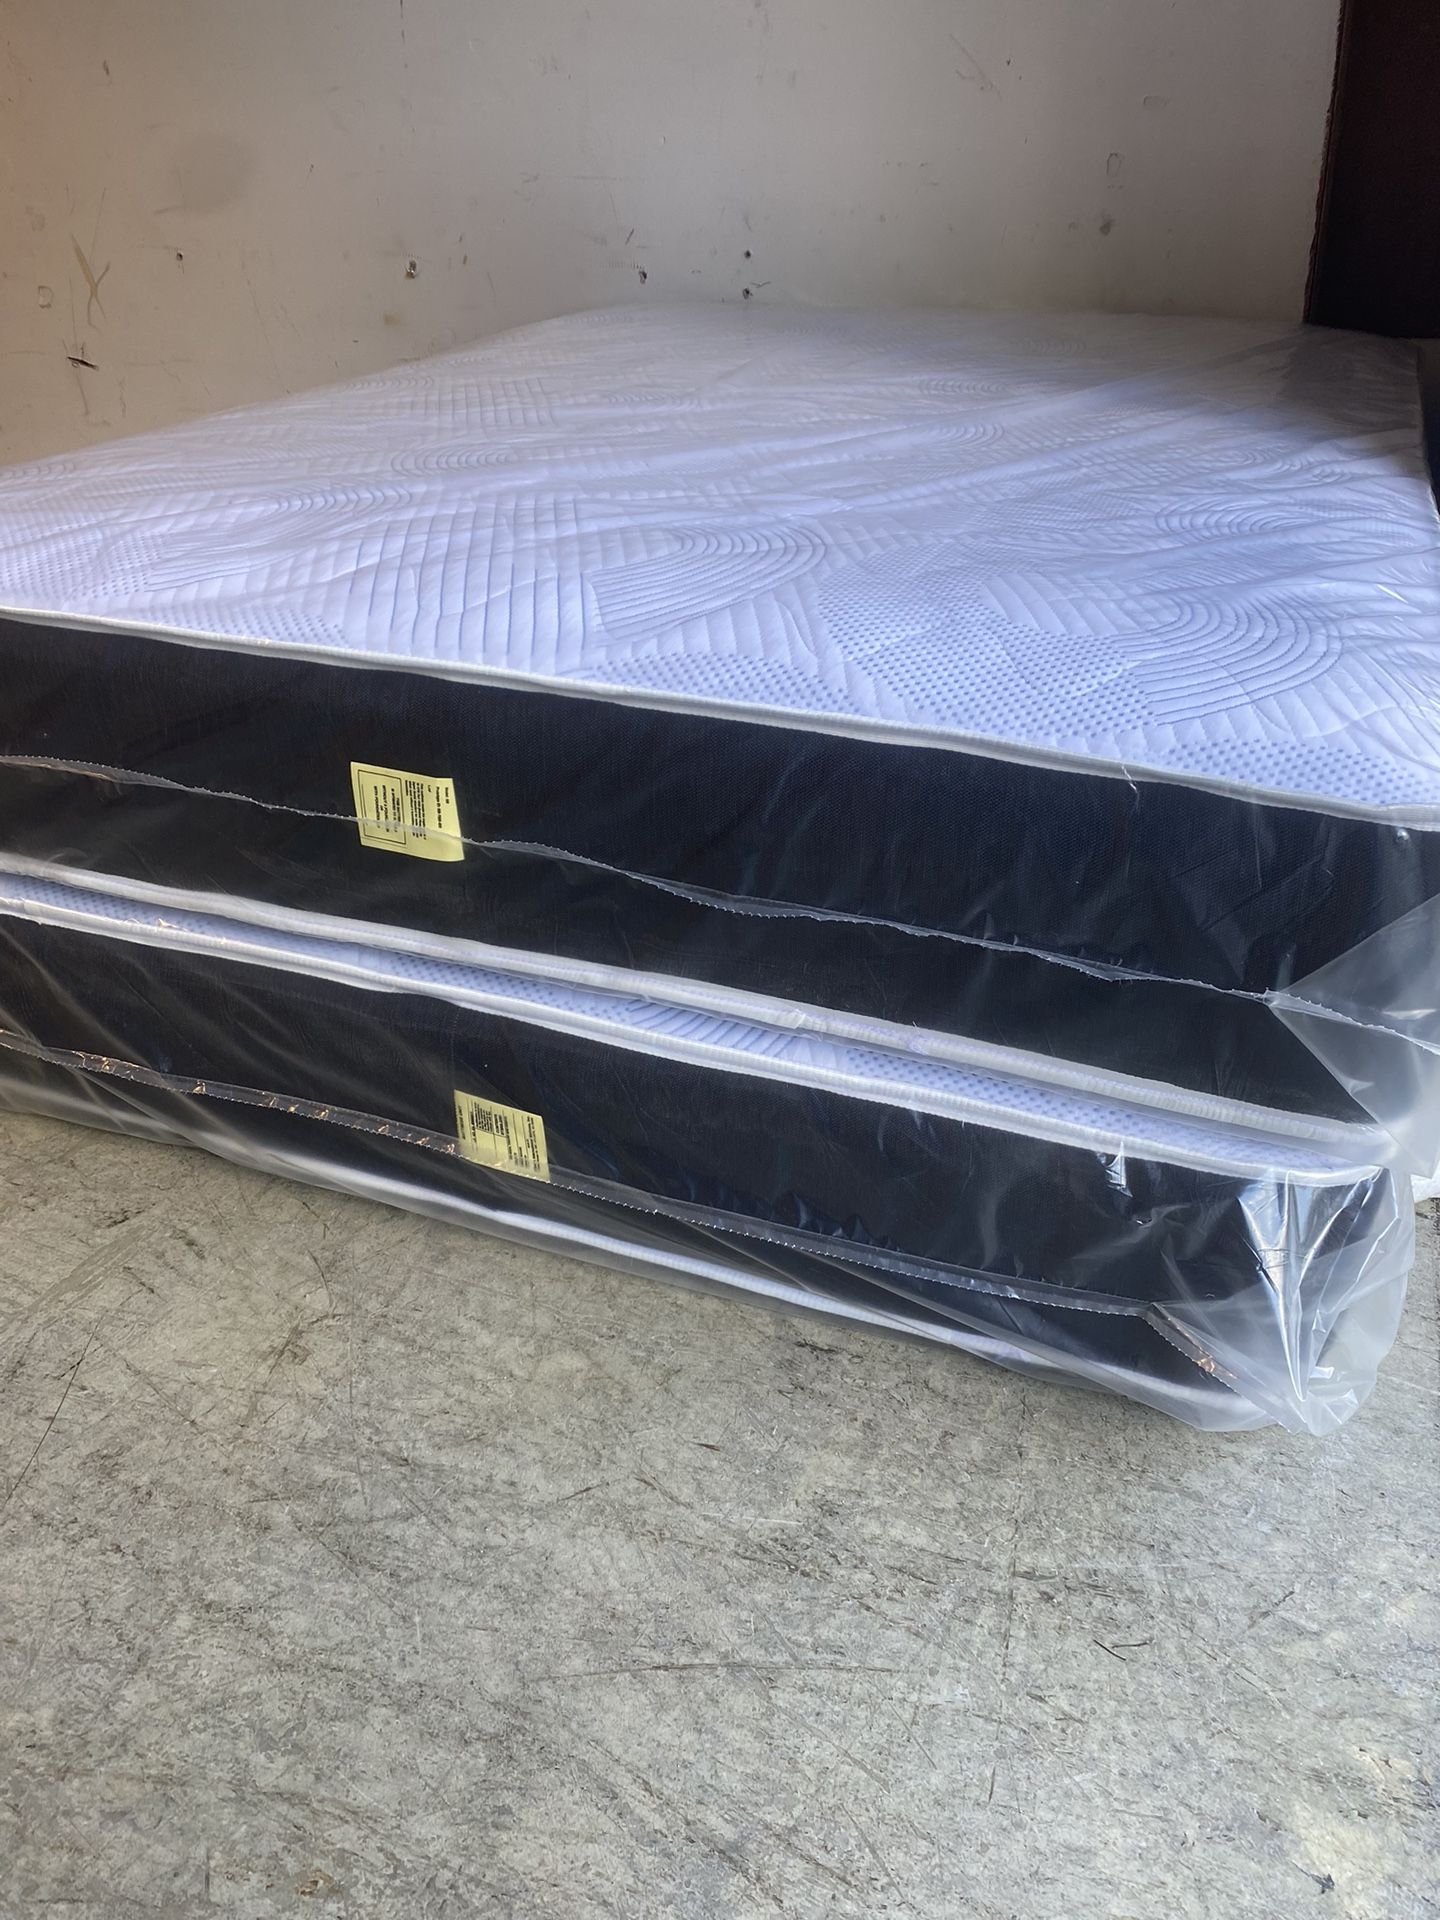 King Mattress And Box Spring New In Plastic Free Delivery In Atlanta 